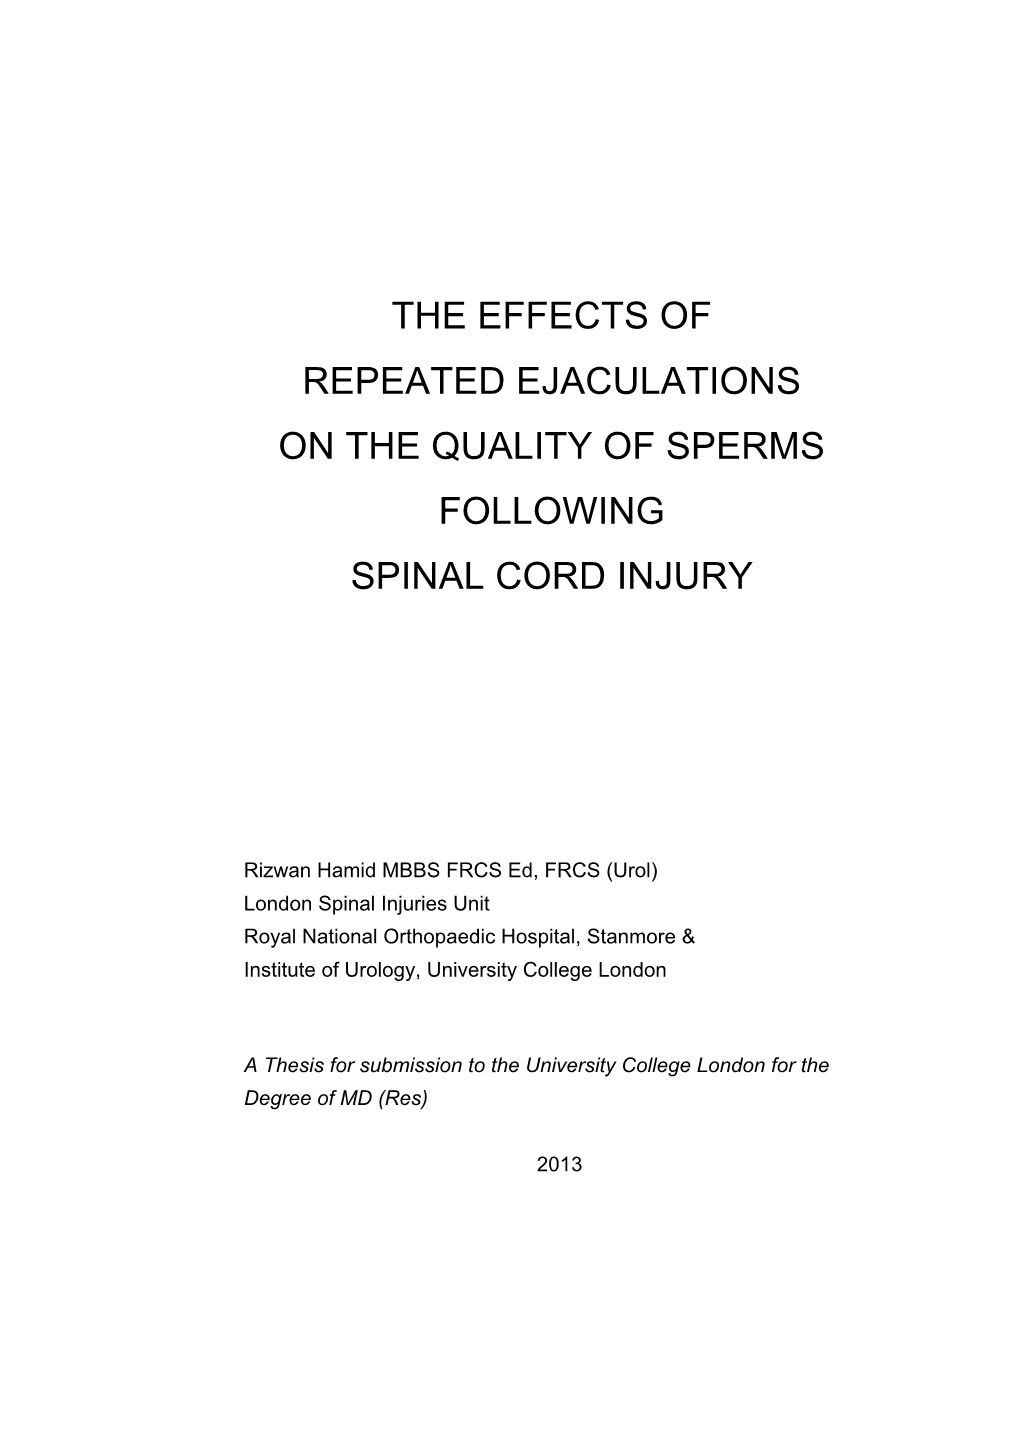 The Effects of Repeated Ejaculations on the Quality of Sperms Following Spinal Cord Injury